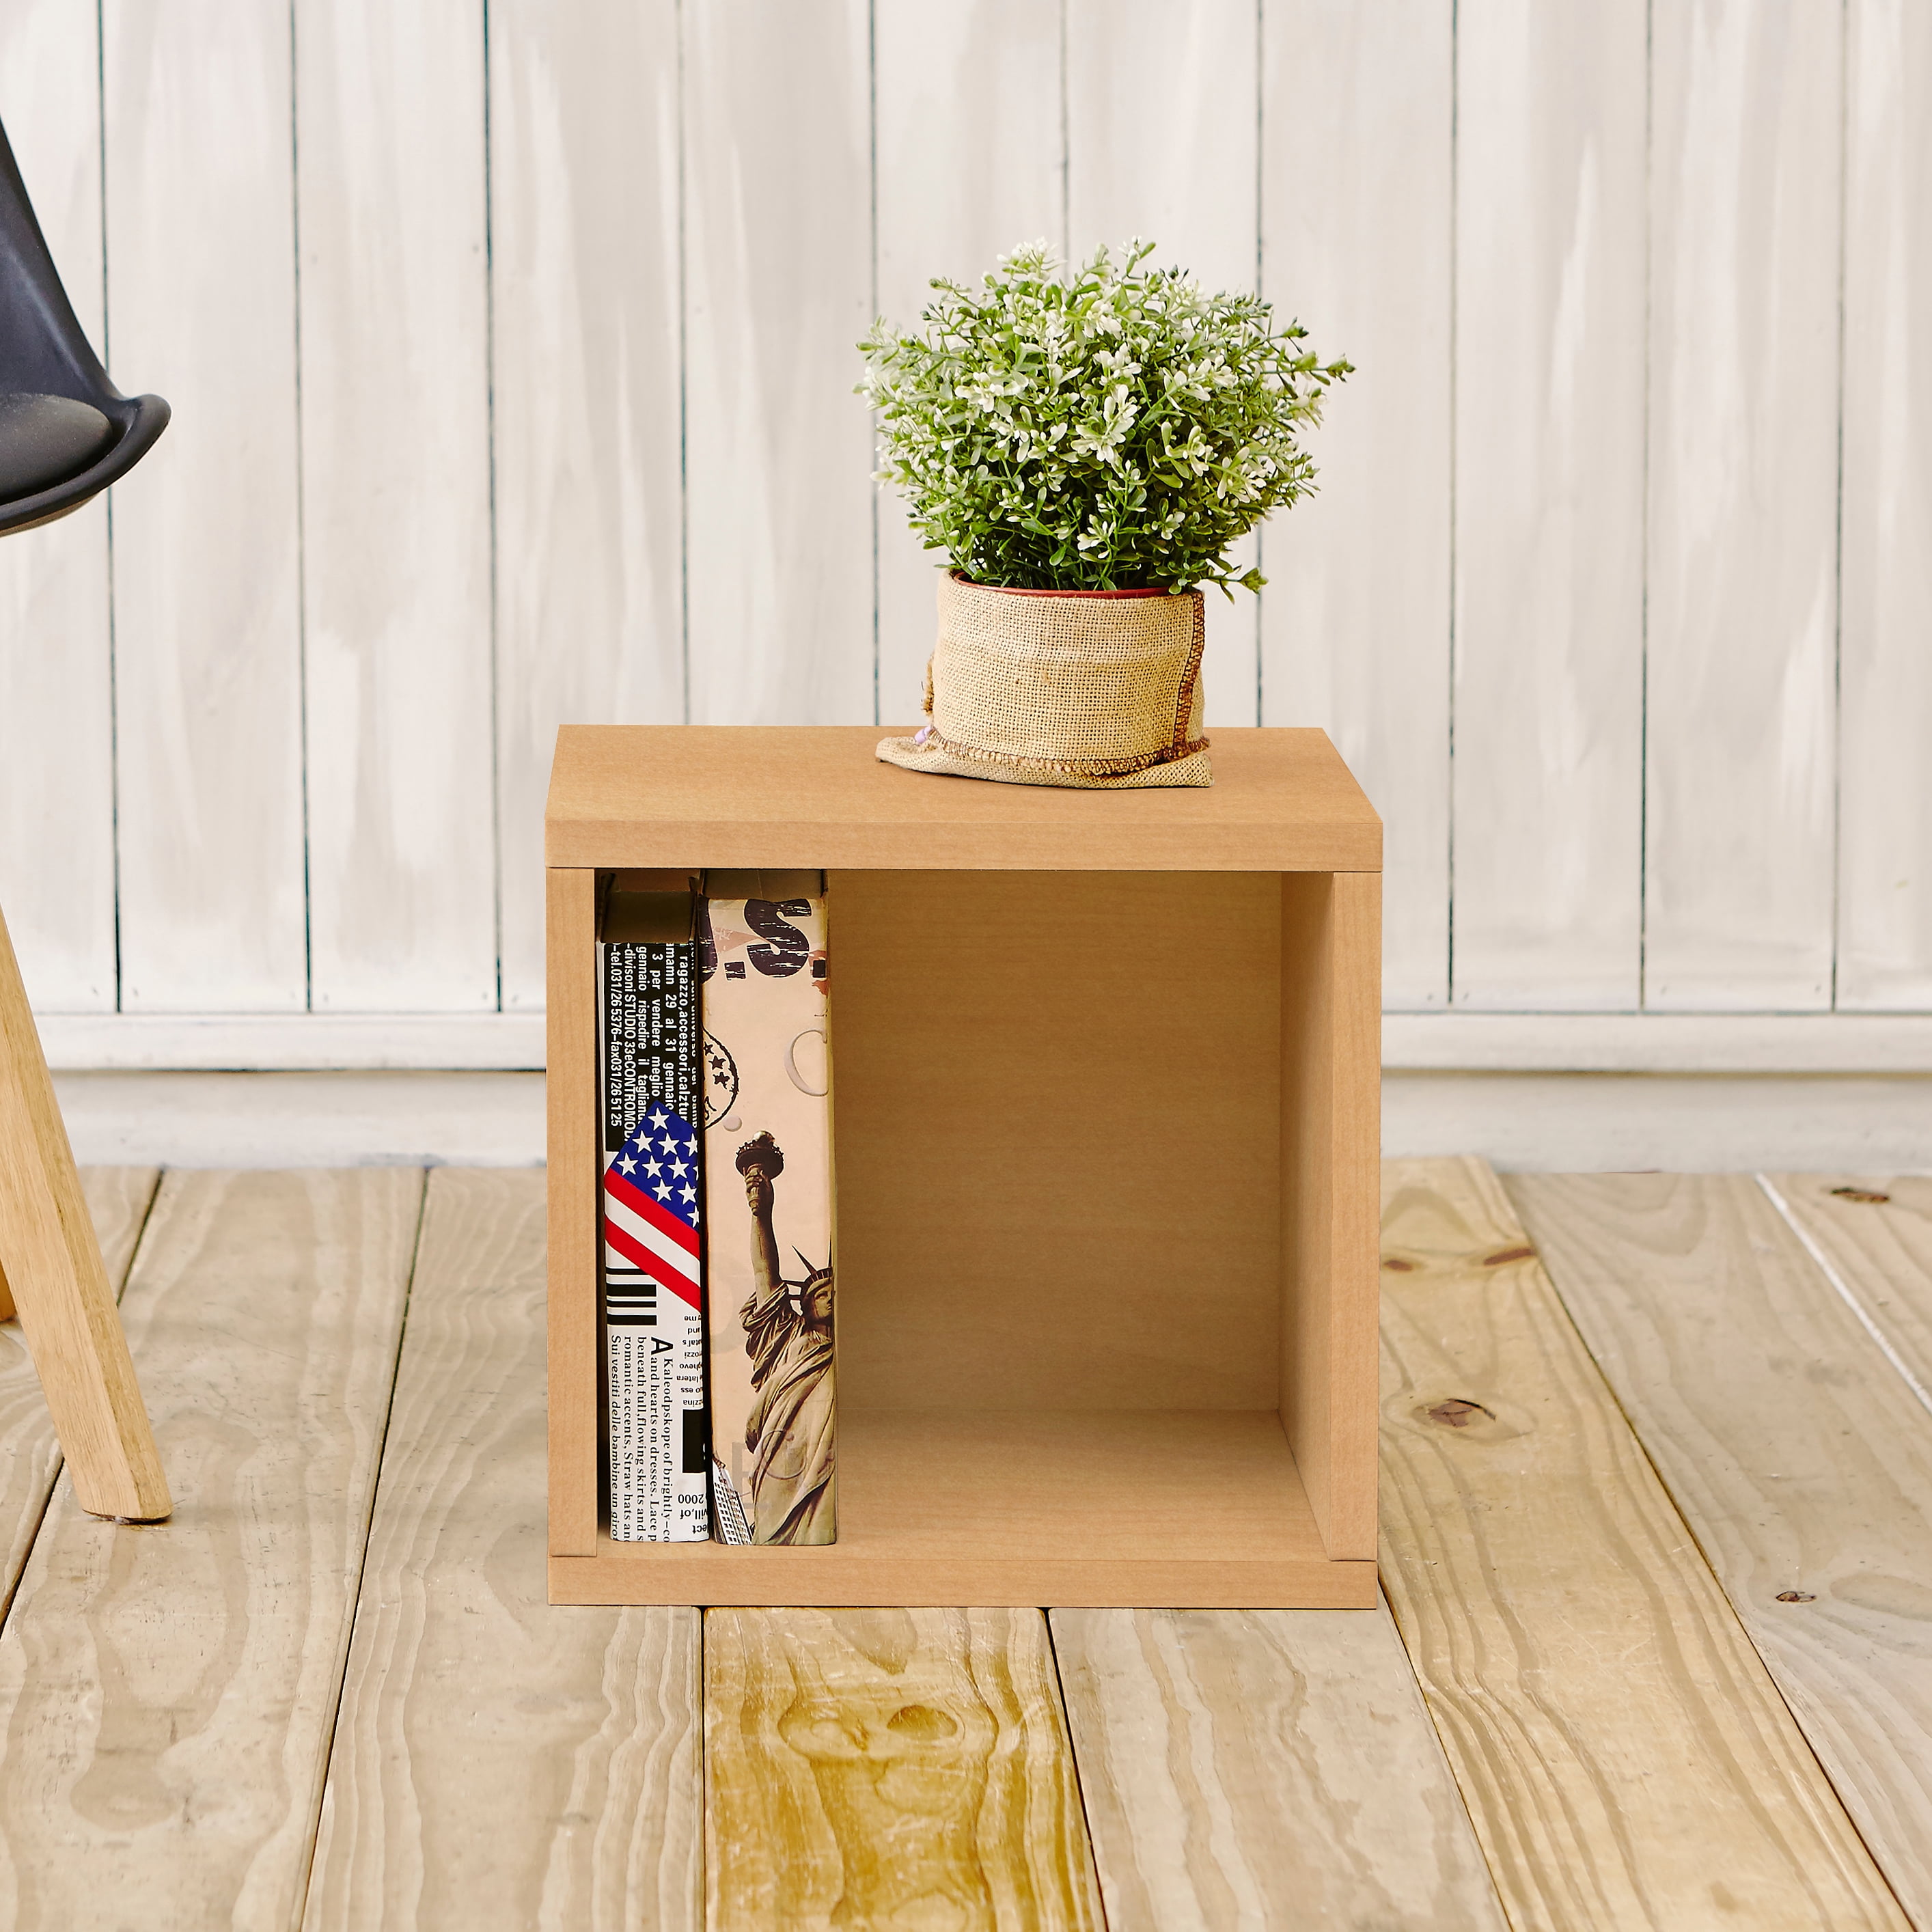 6 Pack: Modular Cube with Shelf by Simply Tidy™ 